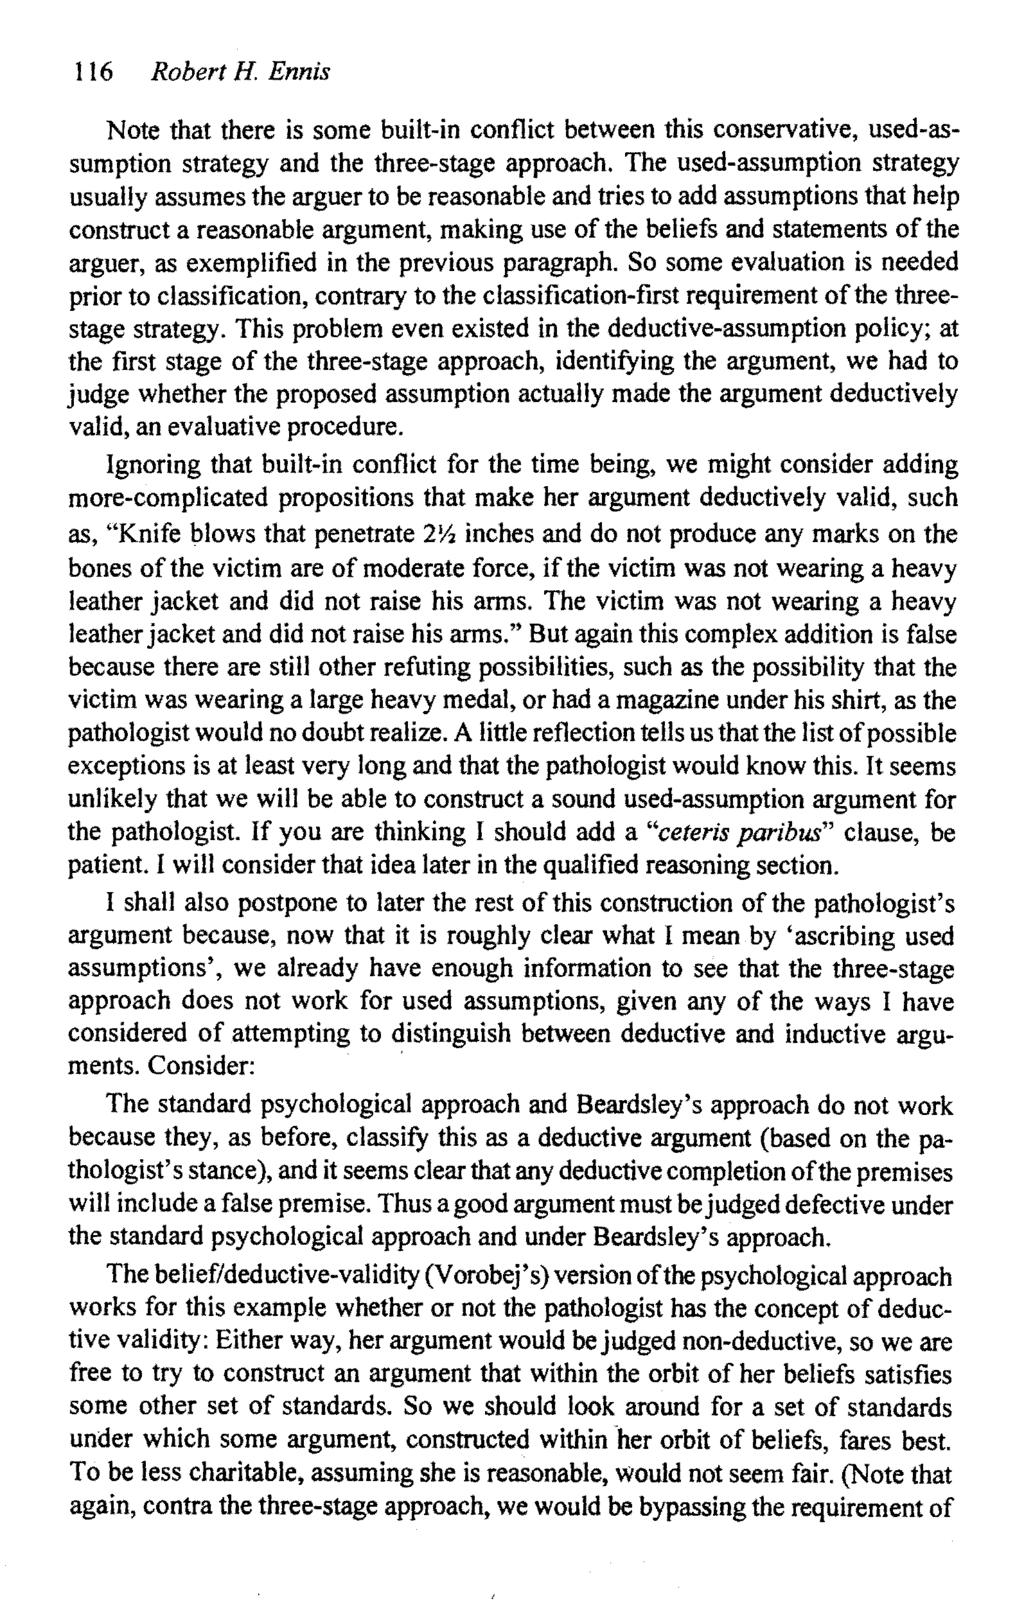 116 Robert HEnnis Note that there is some built-in conflict between this conservative, used-assumption strategy and the three-stage approach.